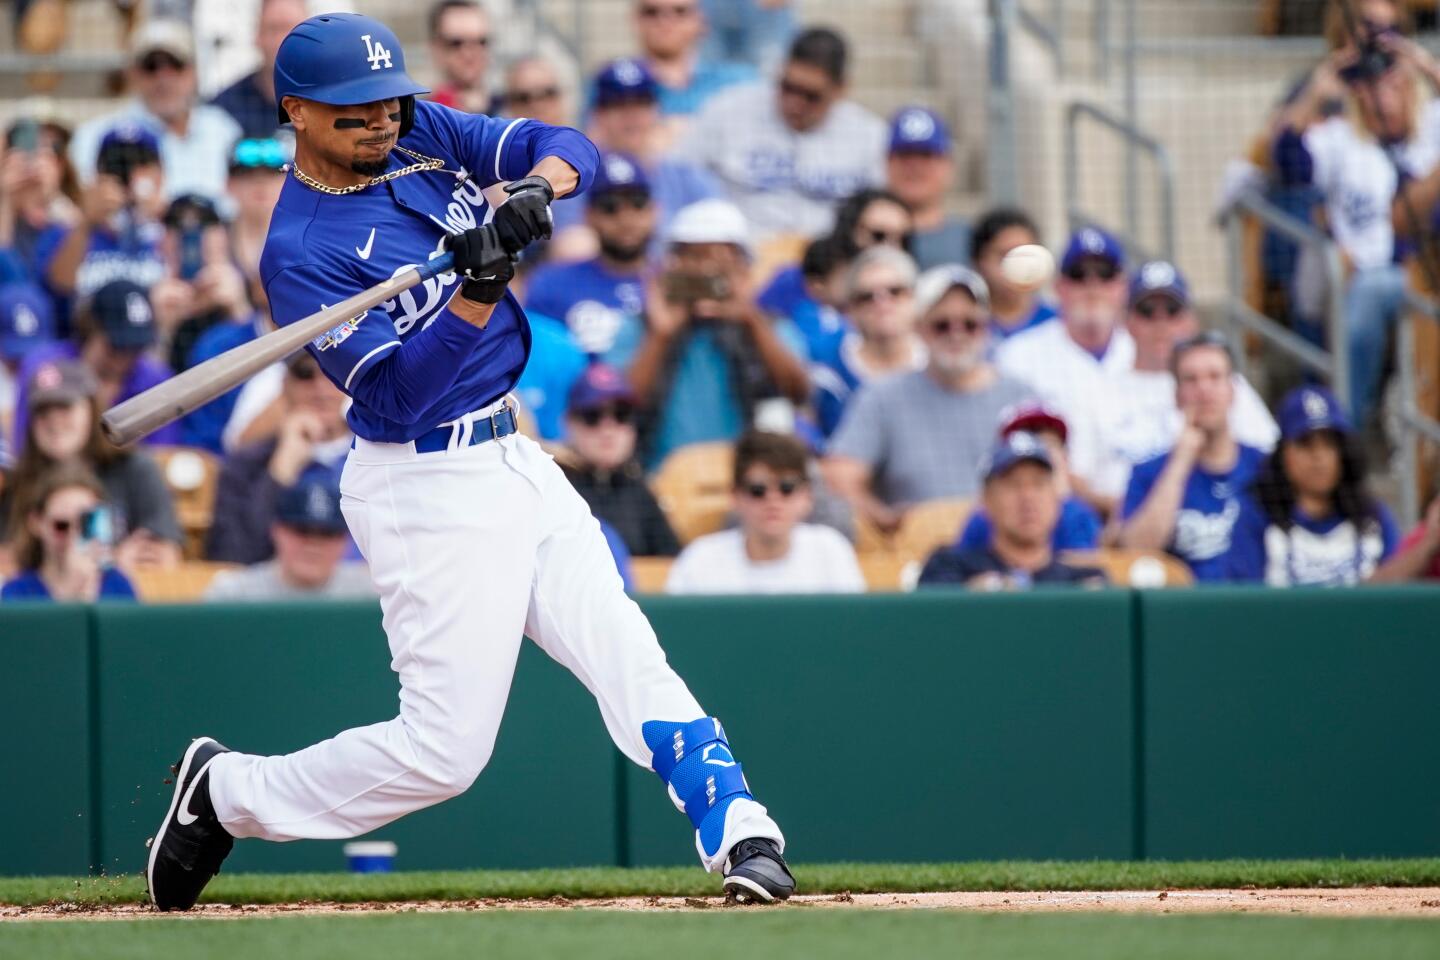 Leadoff hitter Mookie Betts swings at a pitch during his first at bat with the Dodgers during an exhibition game against the Chicago Cubs at Camelback Ranch on Feb. 23.